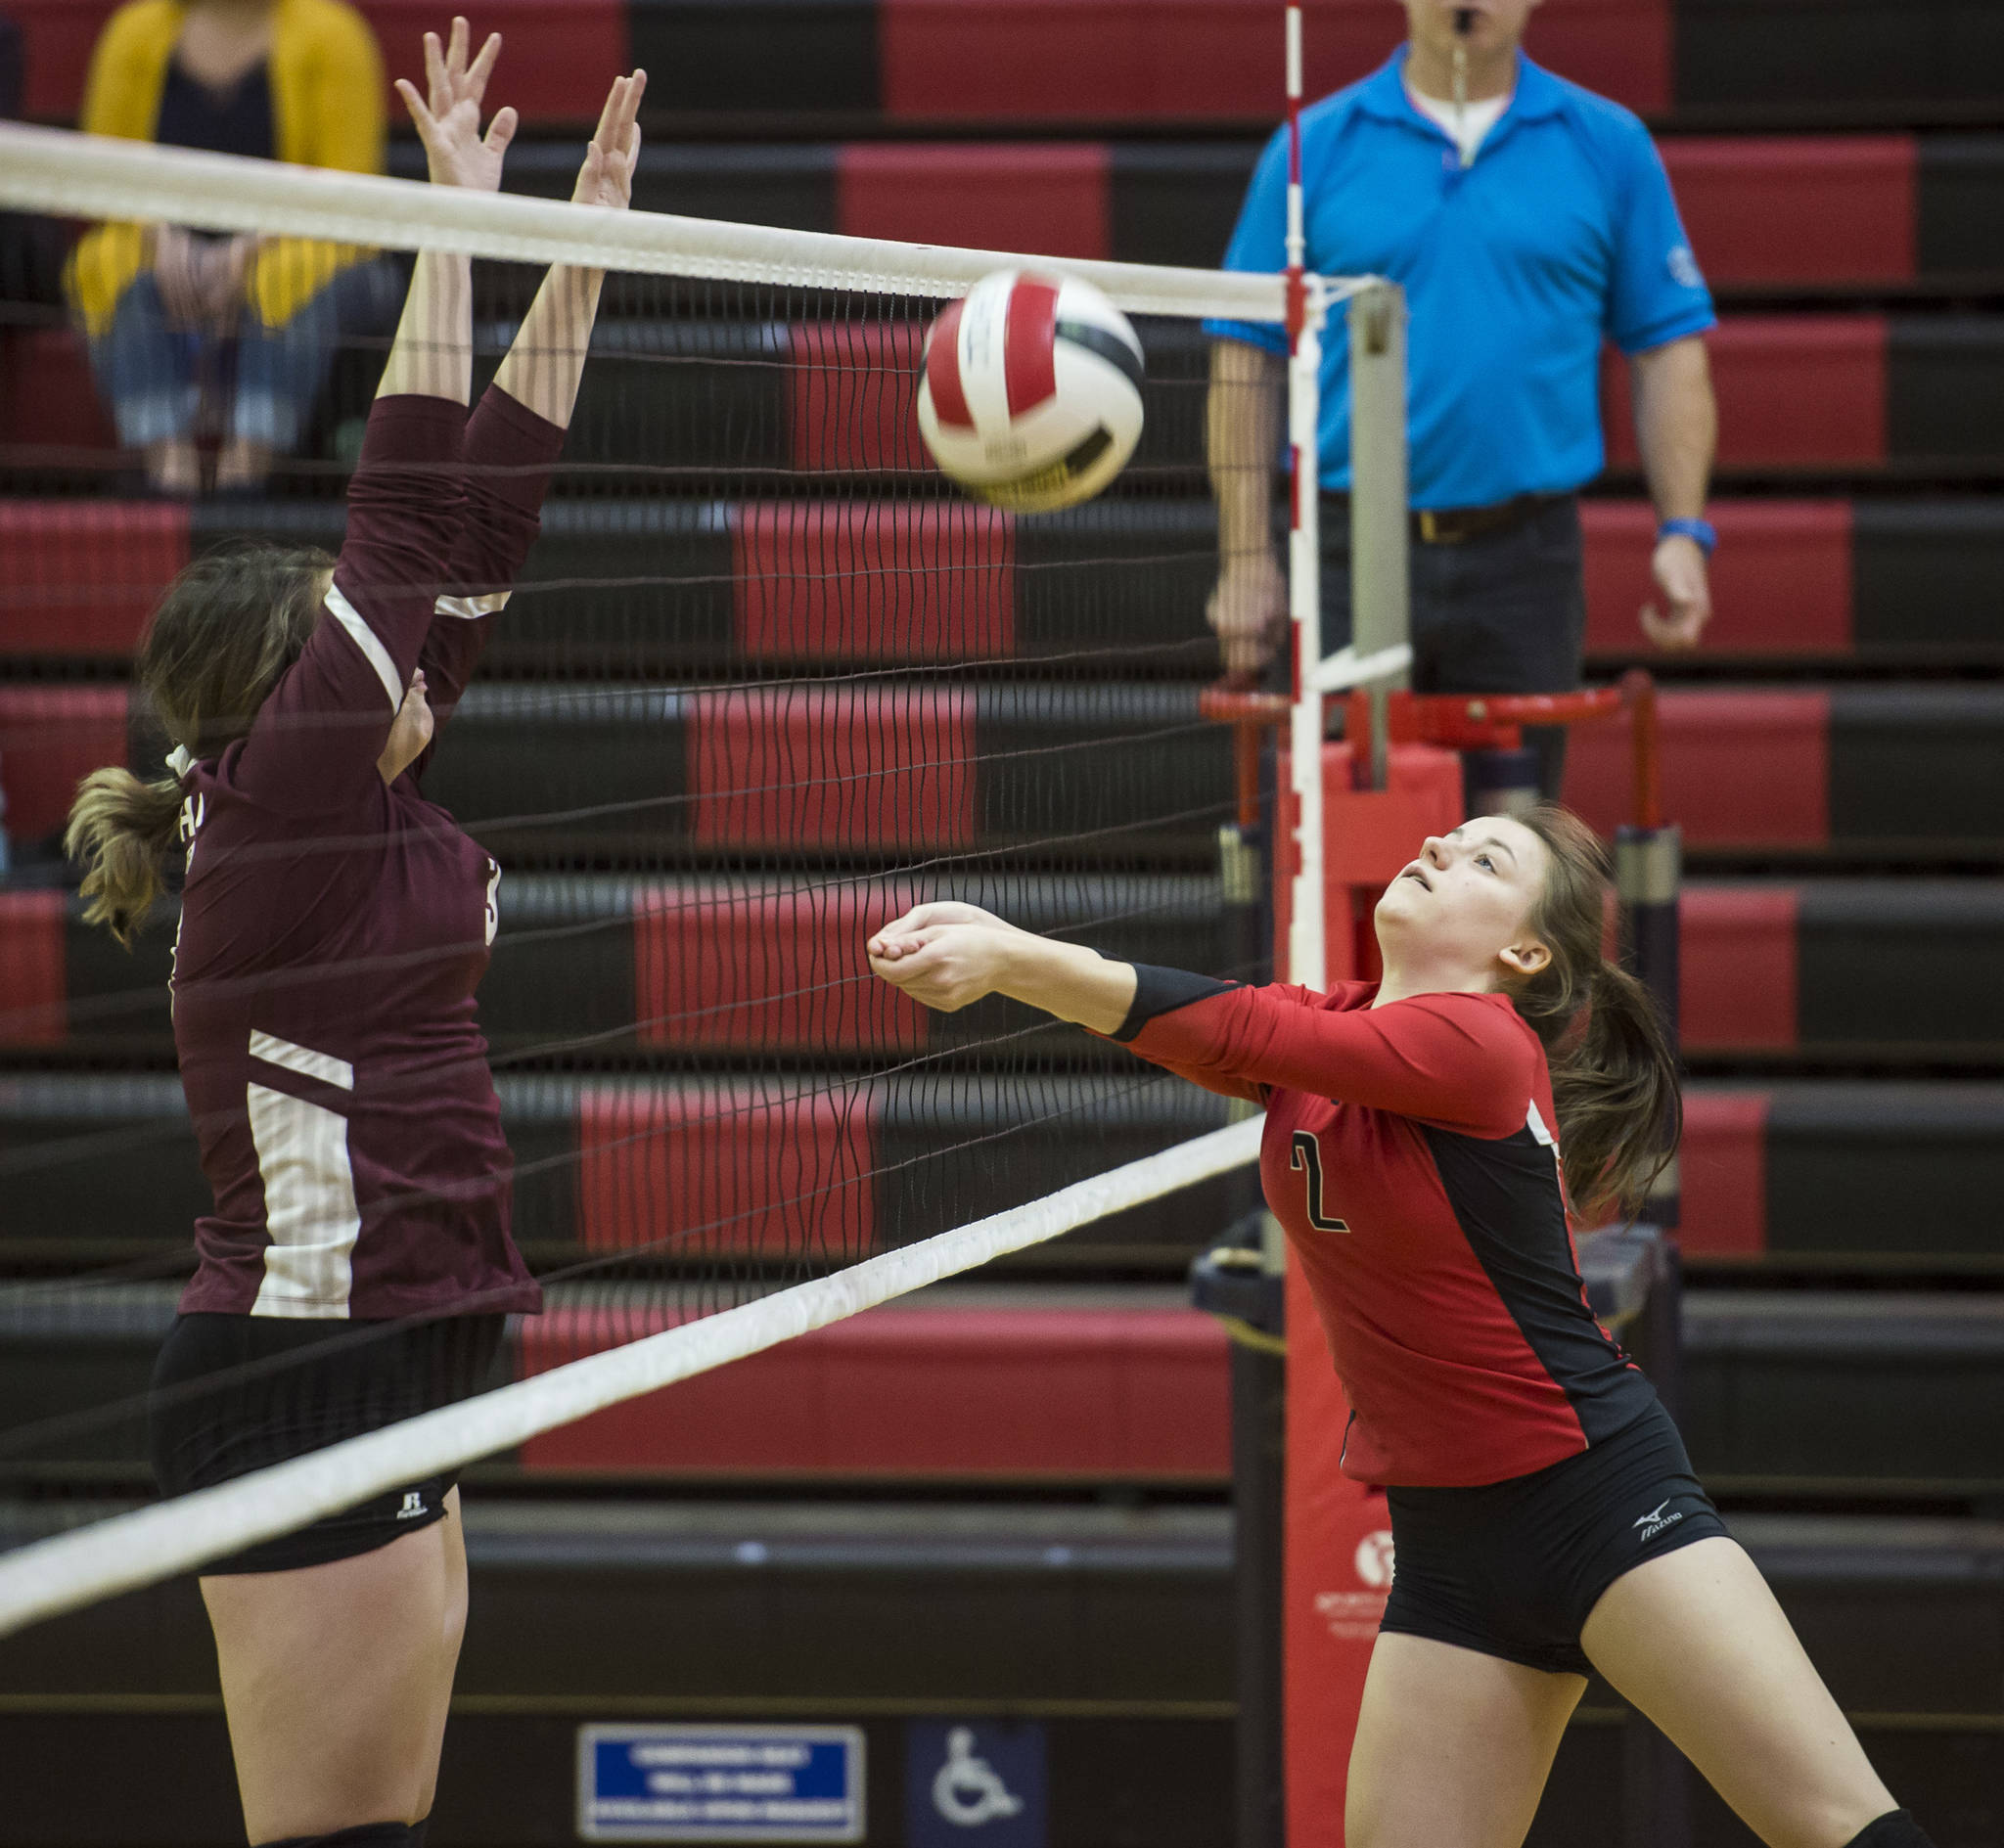 Juneau-Douglas’ Kiana Potter bumps the ball up againt Ketchikan in the first round of the Region V Volleyball Championships at JDHS on Friday, Nov. 2, 2018. JDHS won 3-0 (25-13, 25-16, 25-16). (Michael Penn | Juneau Empire)